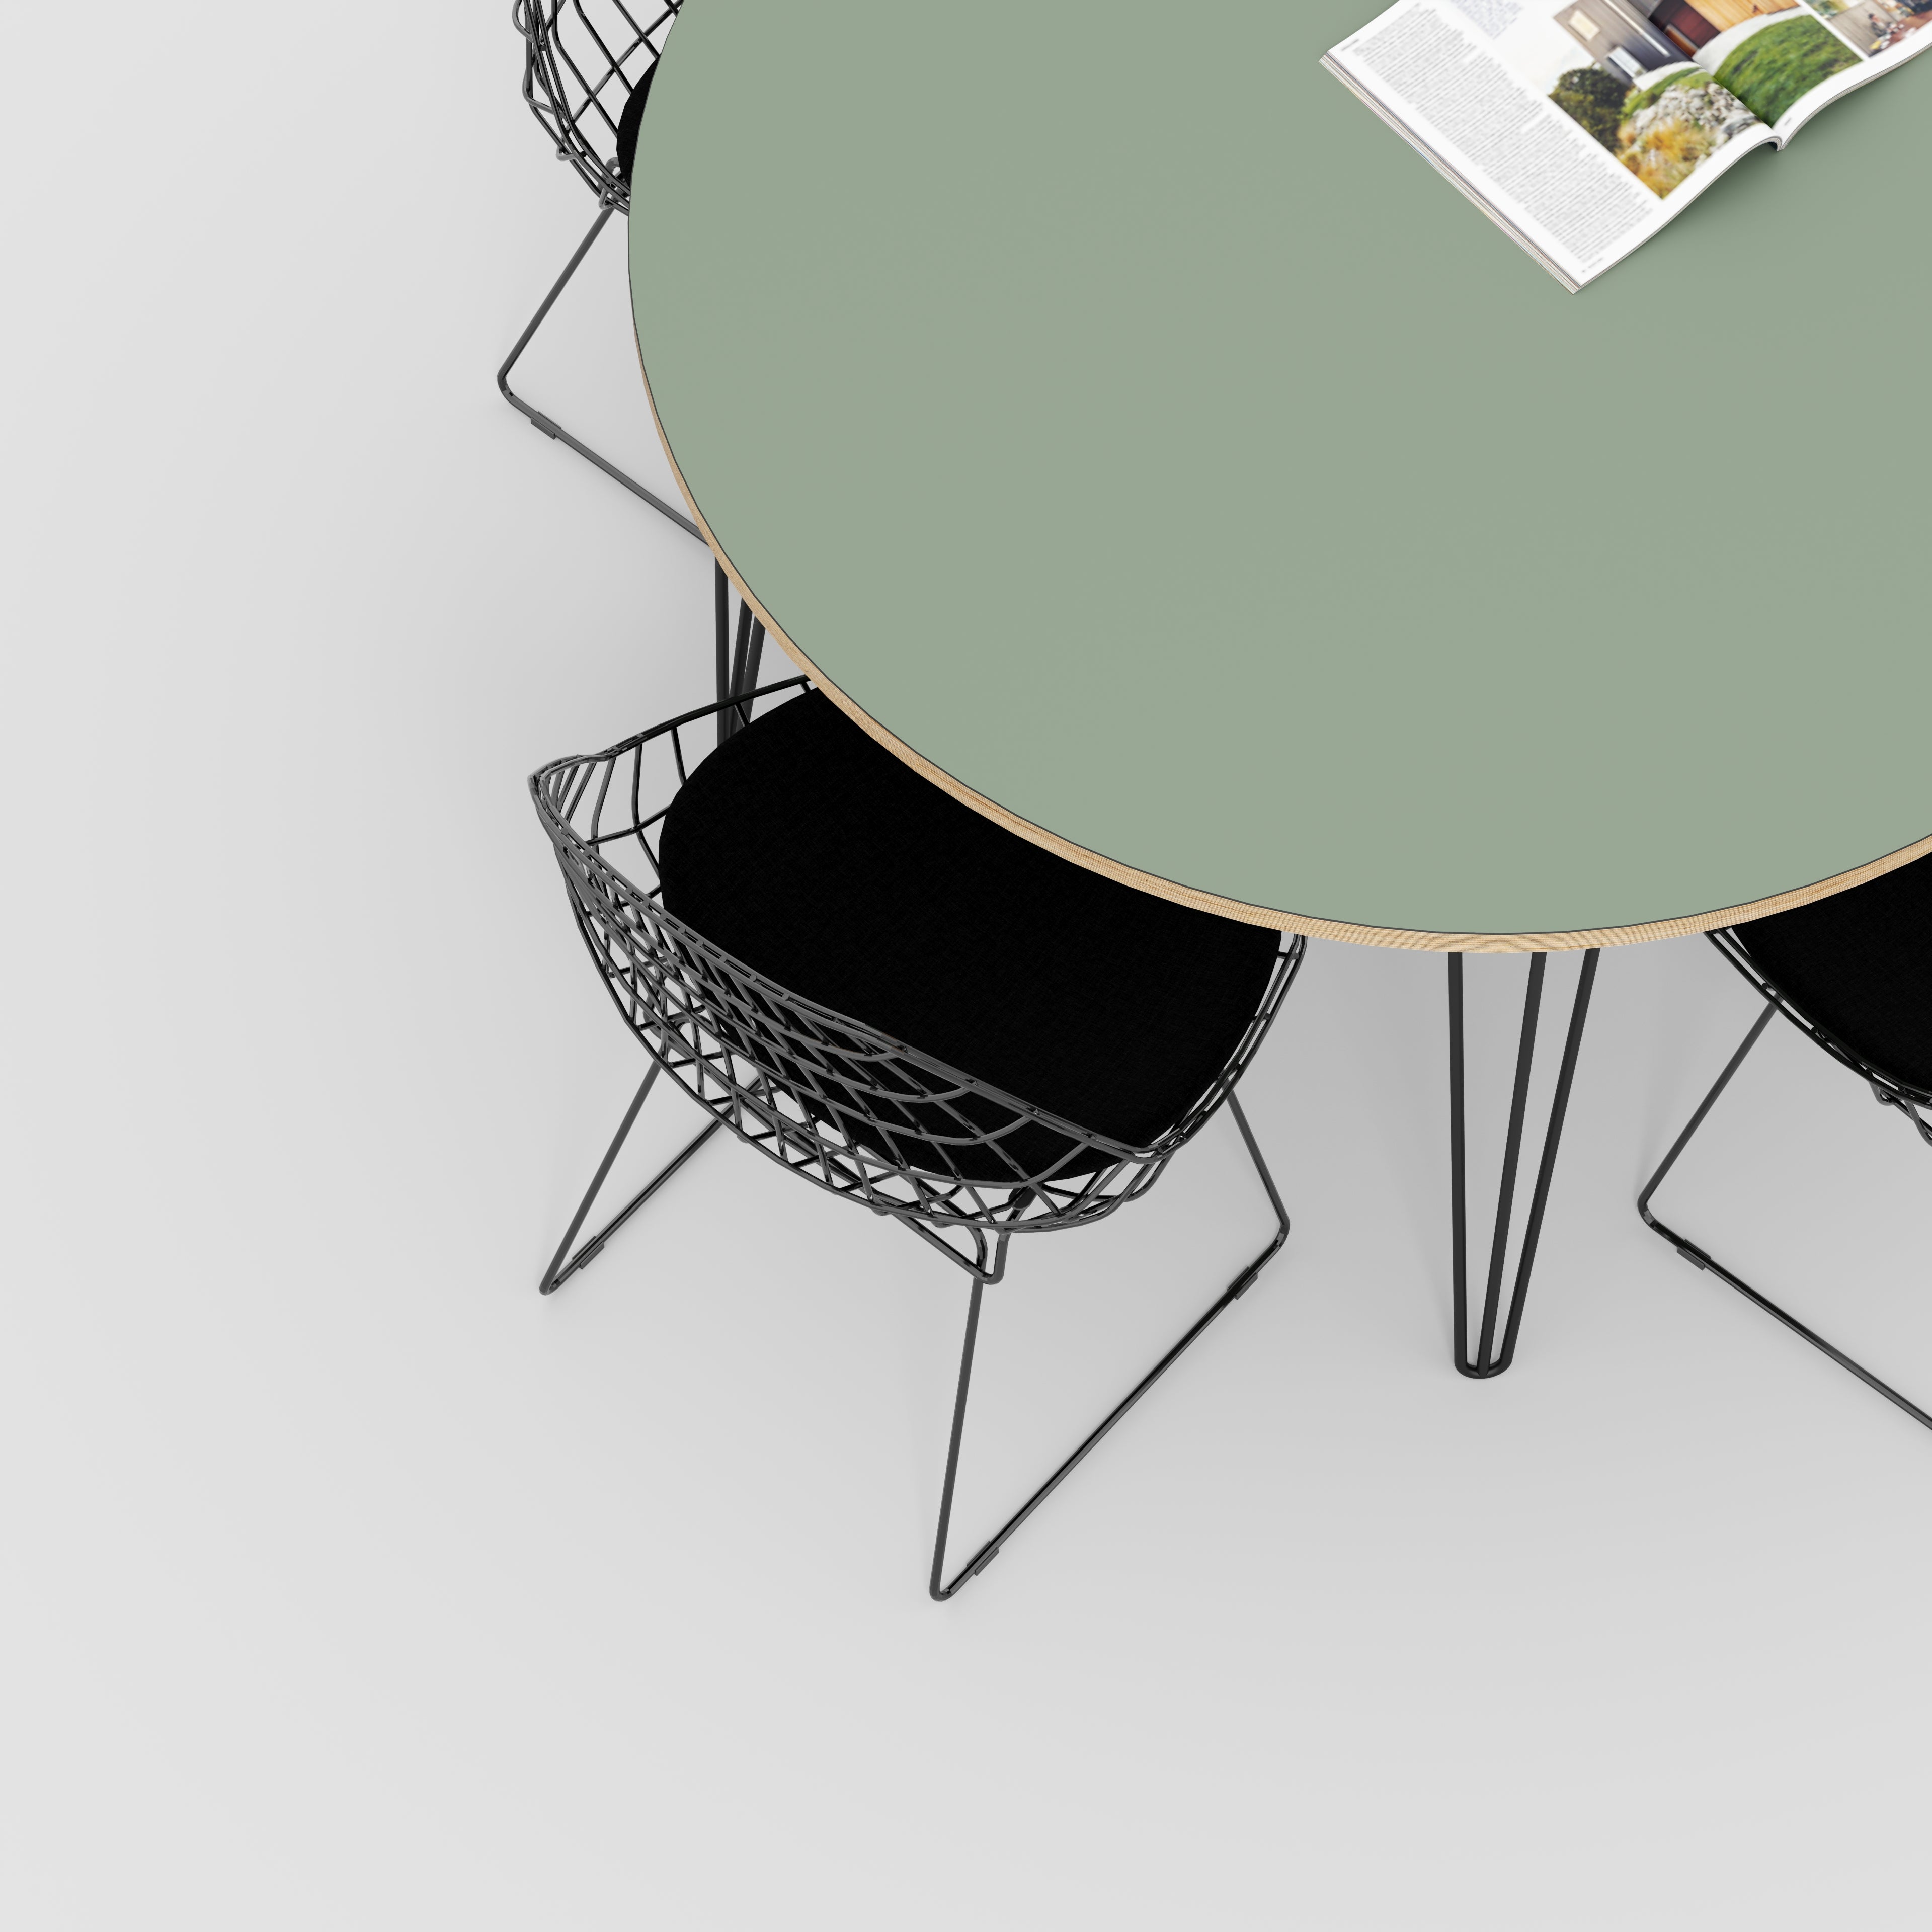 Round Table with Black Hairpin Legs - Formica Green Slate - 1200(dia) x 735(h)